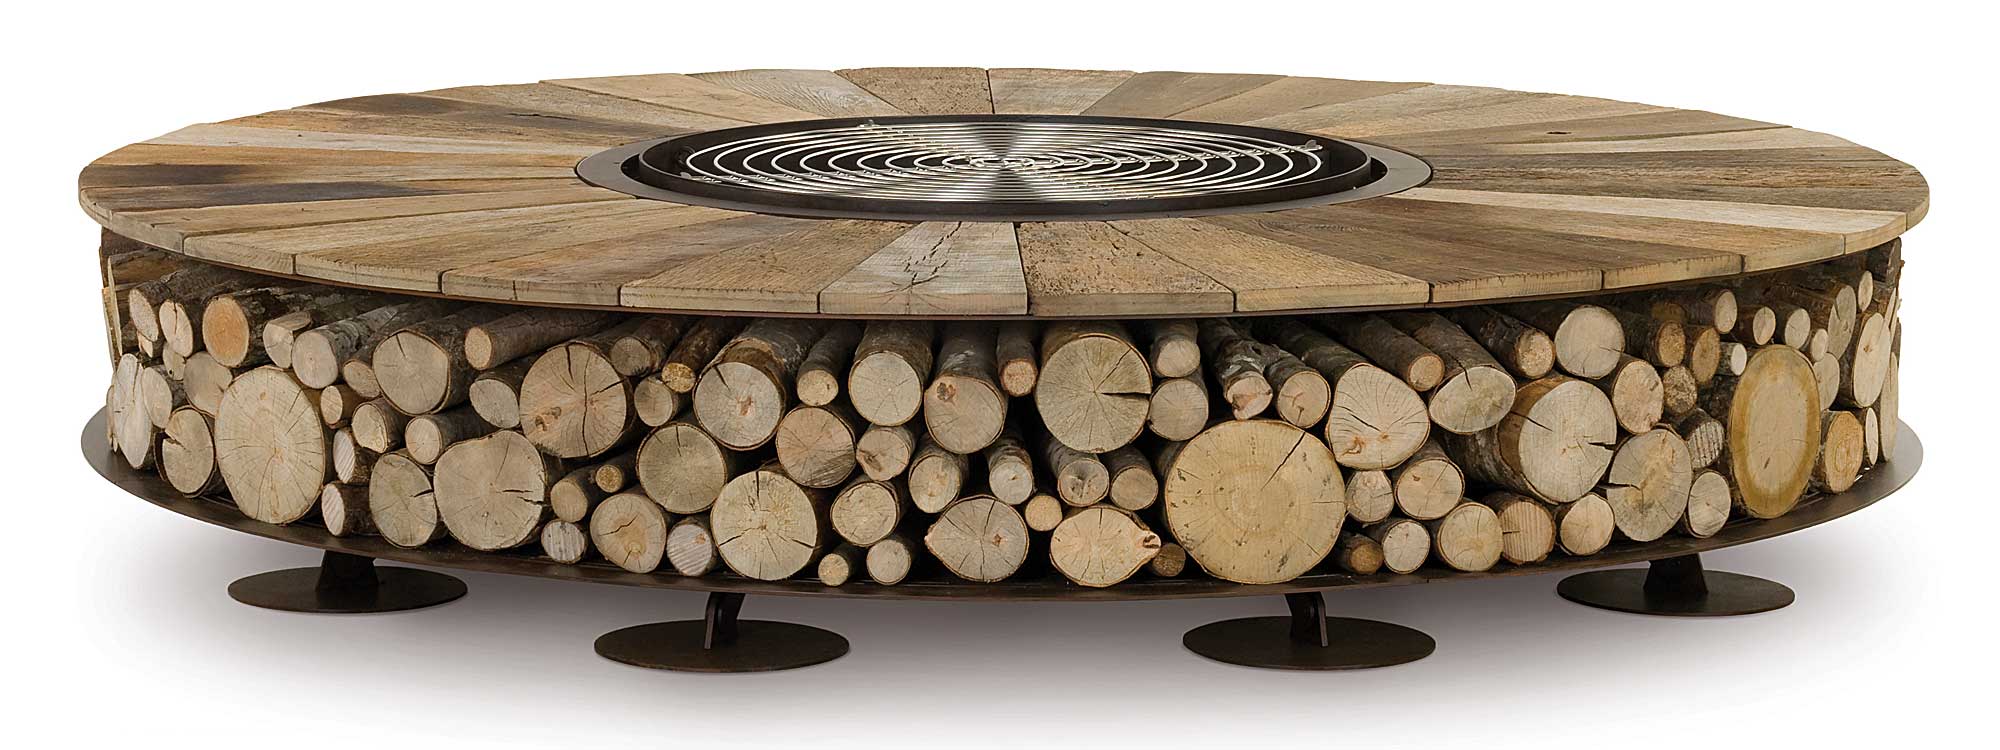 Studio image of Zero circular fire pit with stainless steel grill and chestnut wood surround by AK47 Design, Italy.